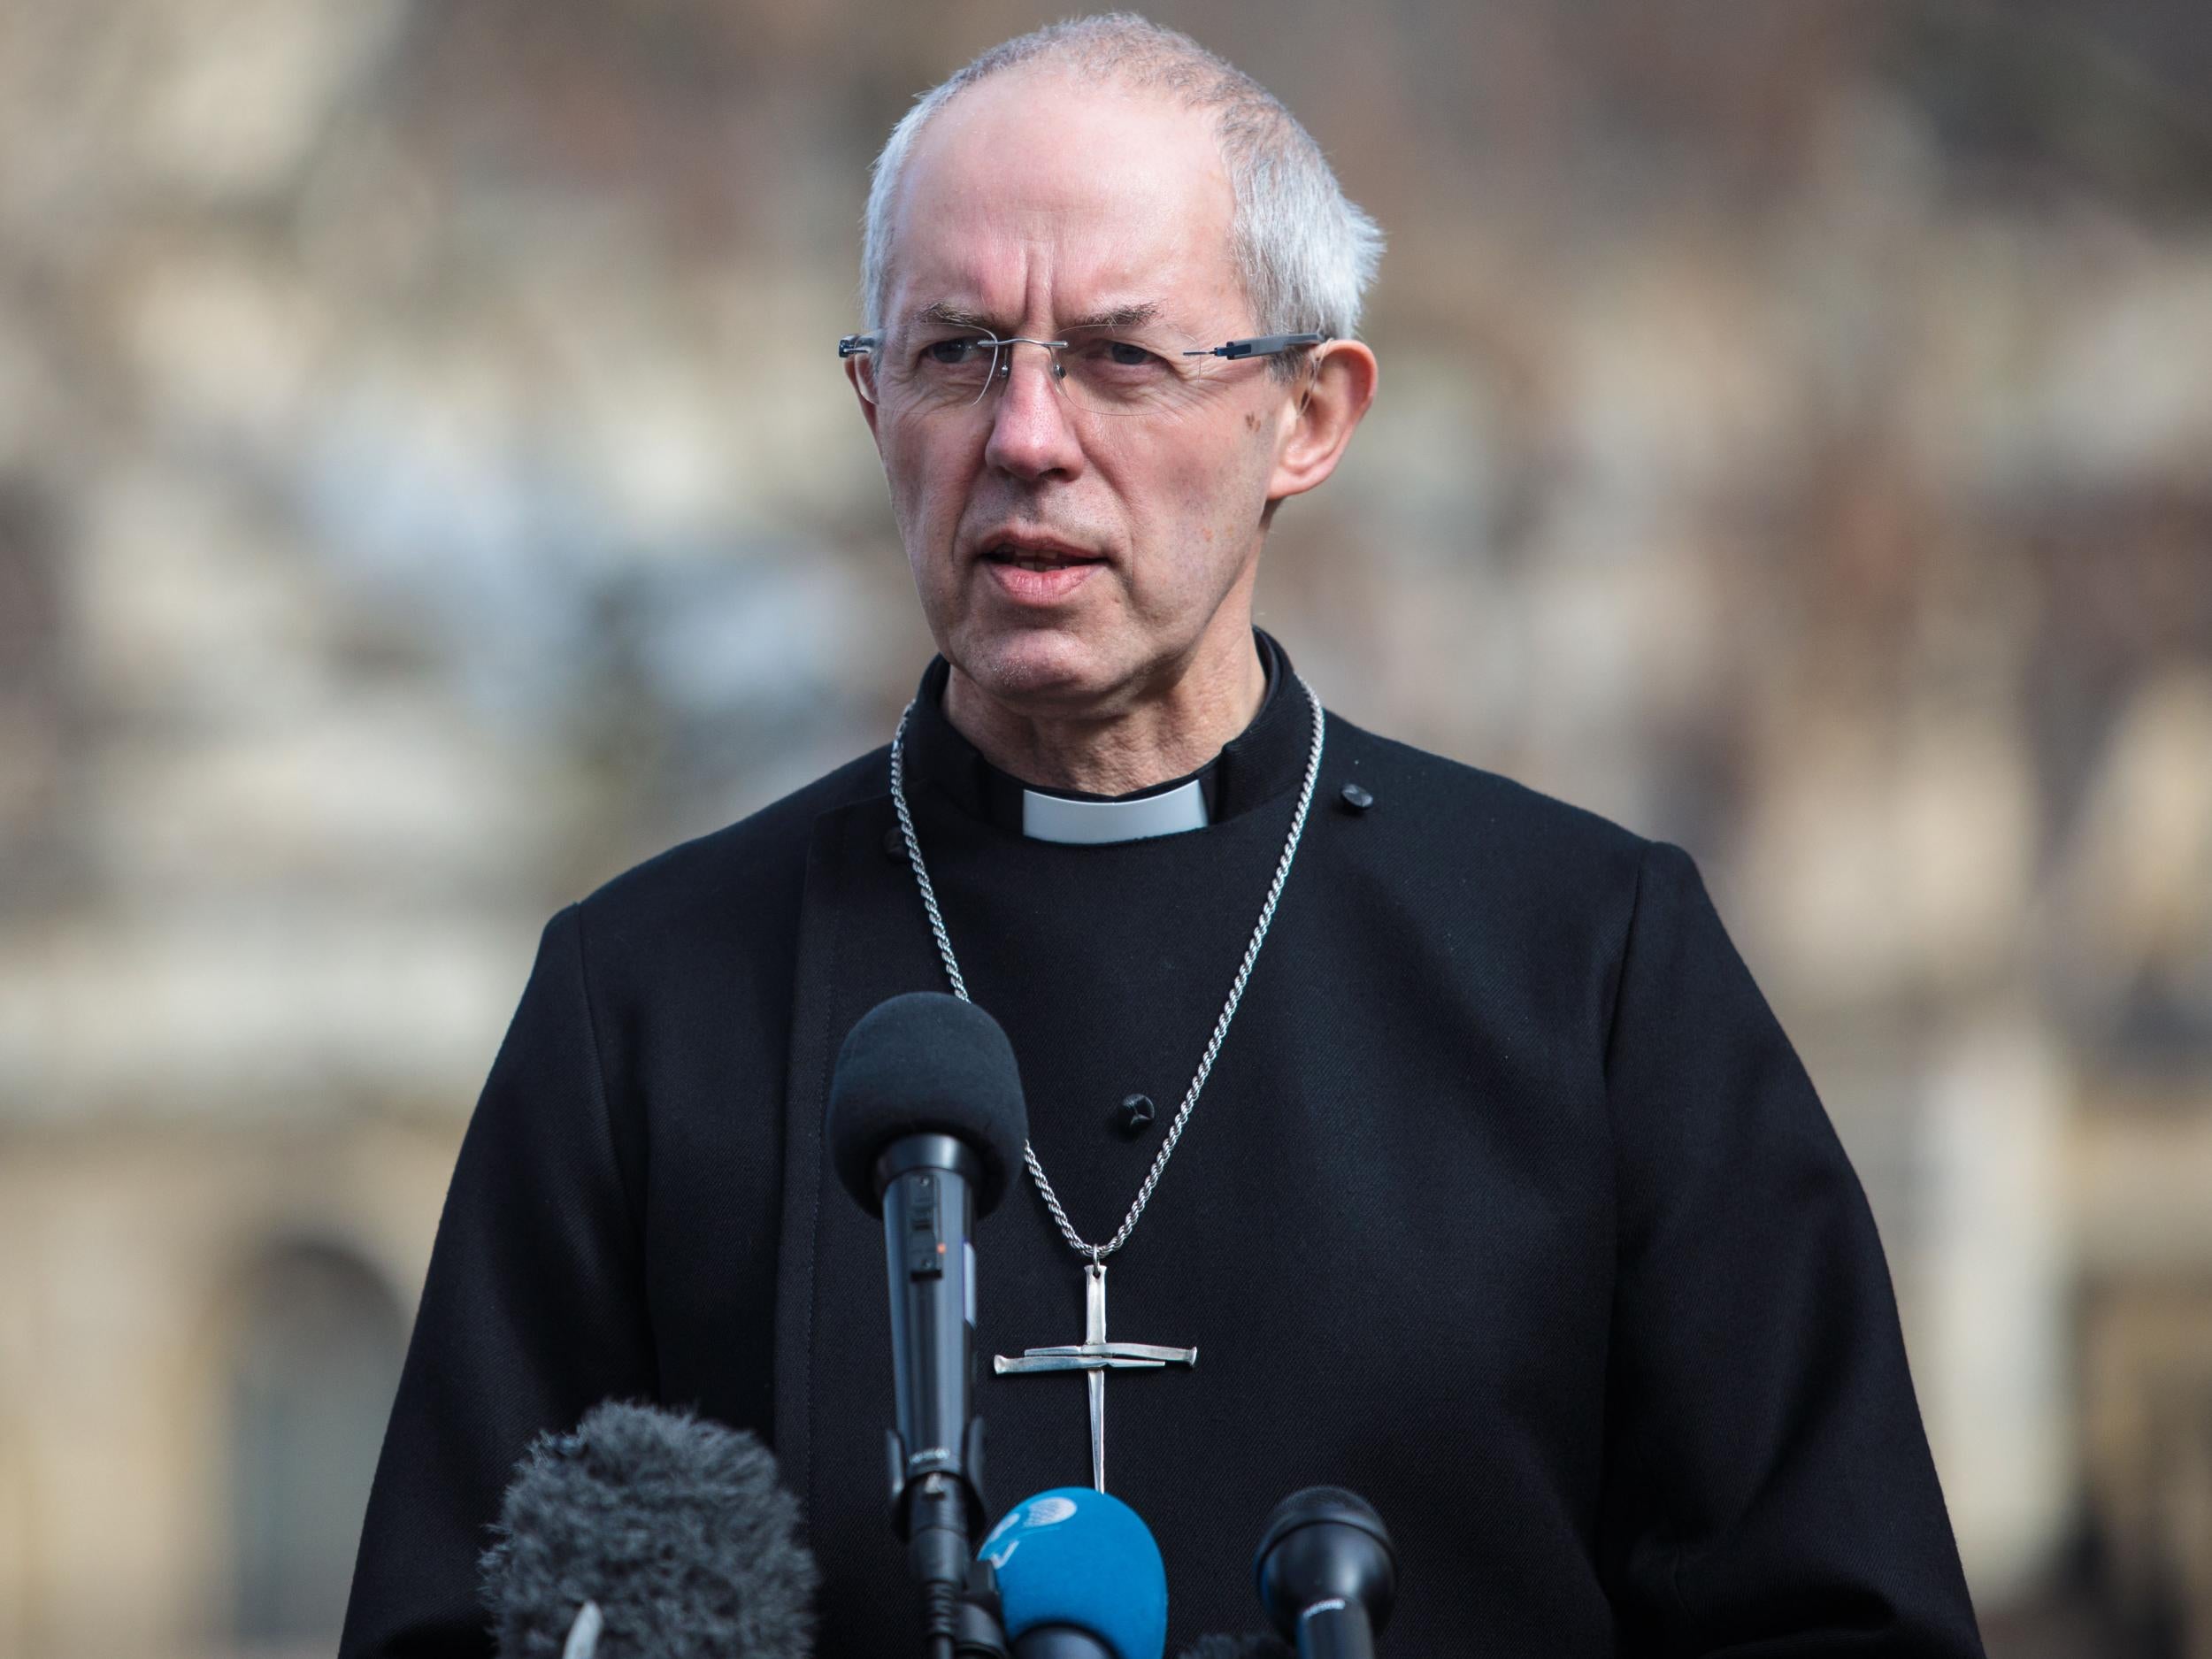 Archbishop of Canterbury, Justin Welby, has acknowledged the enormous threat posed to humanity by climate change